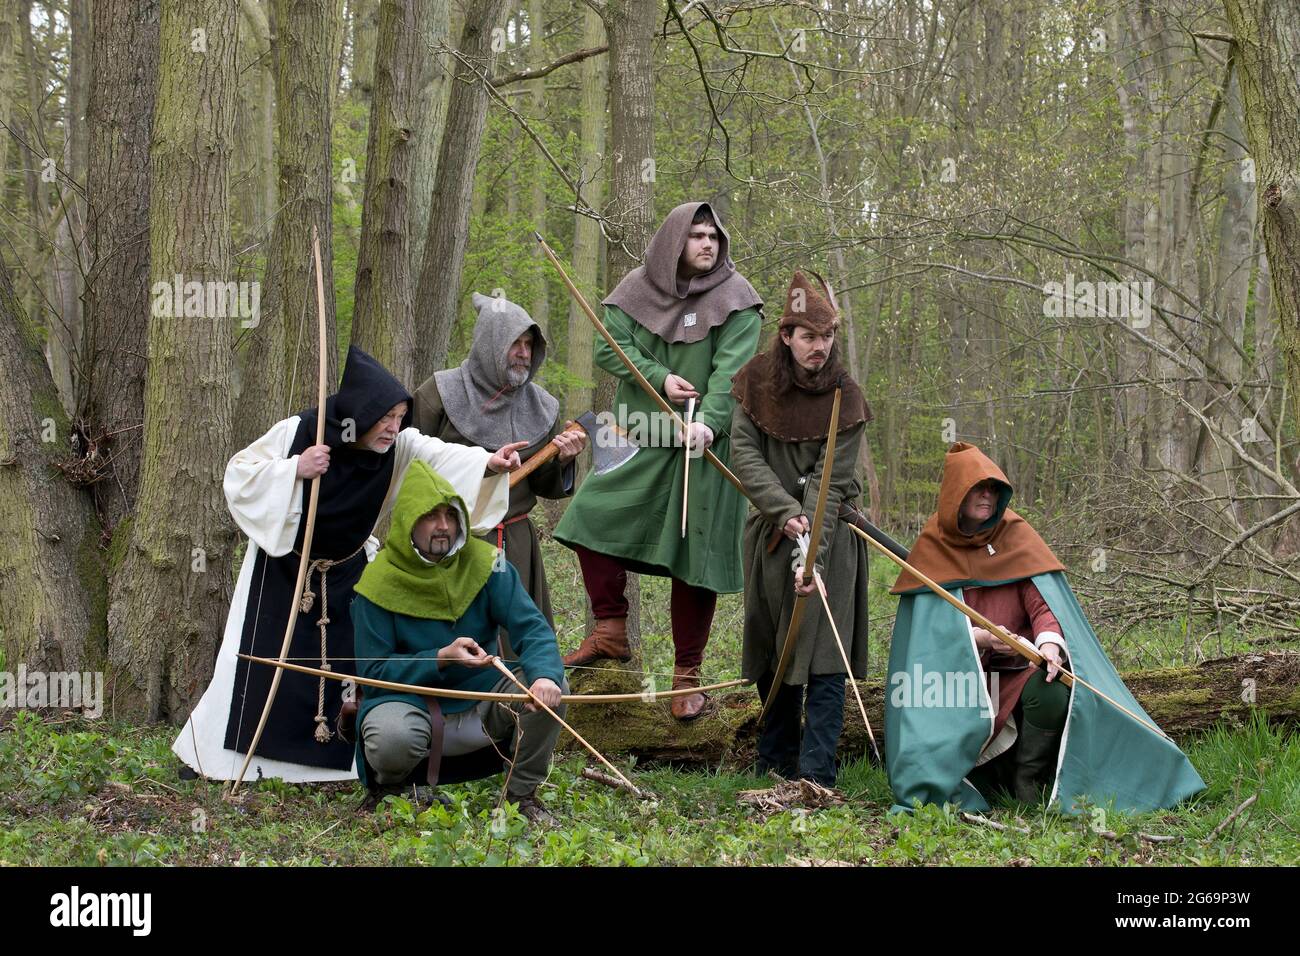 Interpretation of iconic English outlaw and rebel Robin Hood with his band of followers. Stock Photo